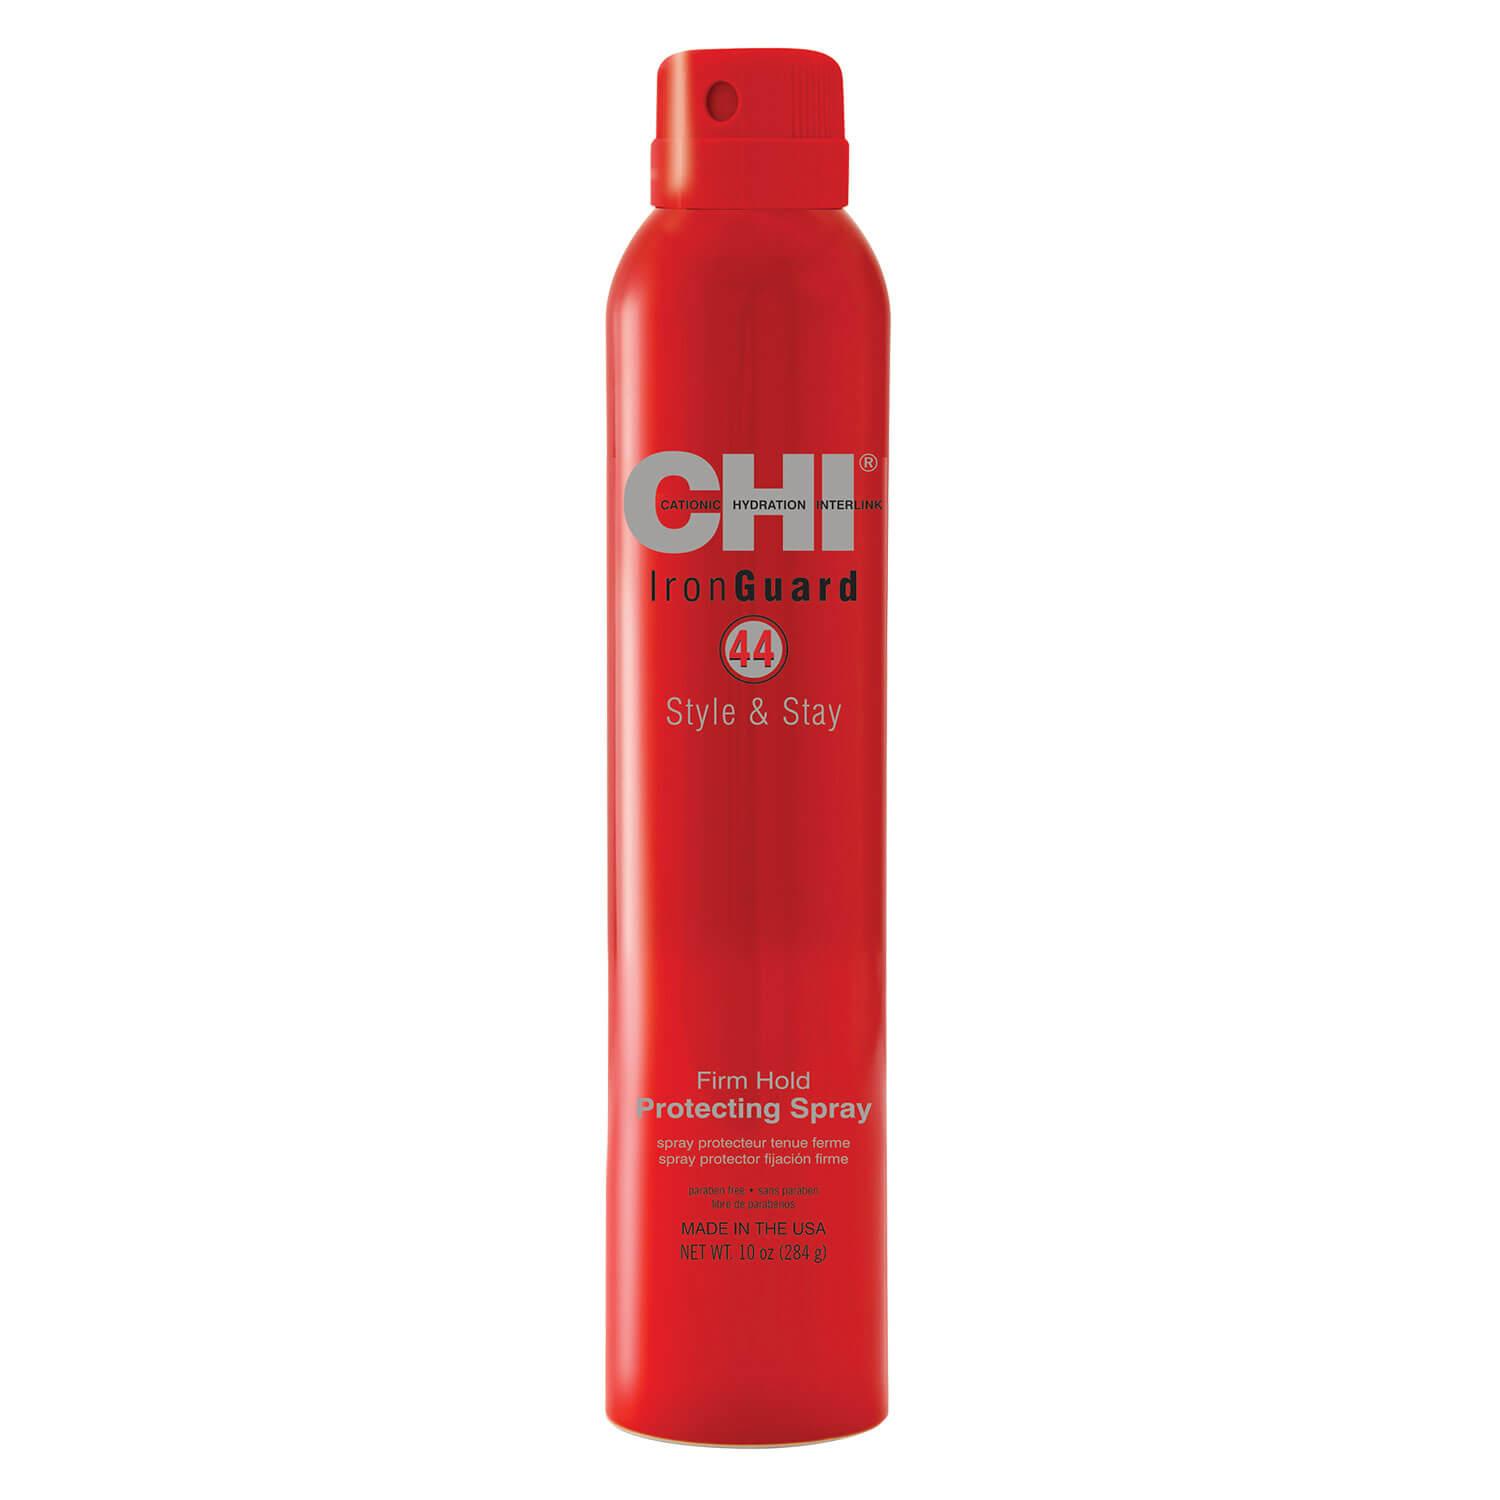 CHI 44 Iron Guard - Style & Stay Firm Hold Protecting Spray